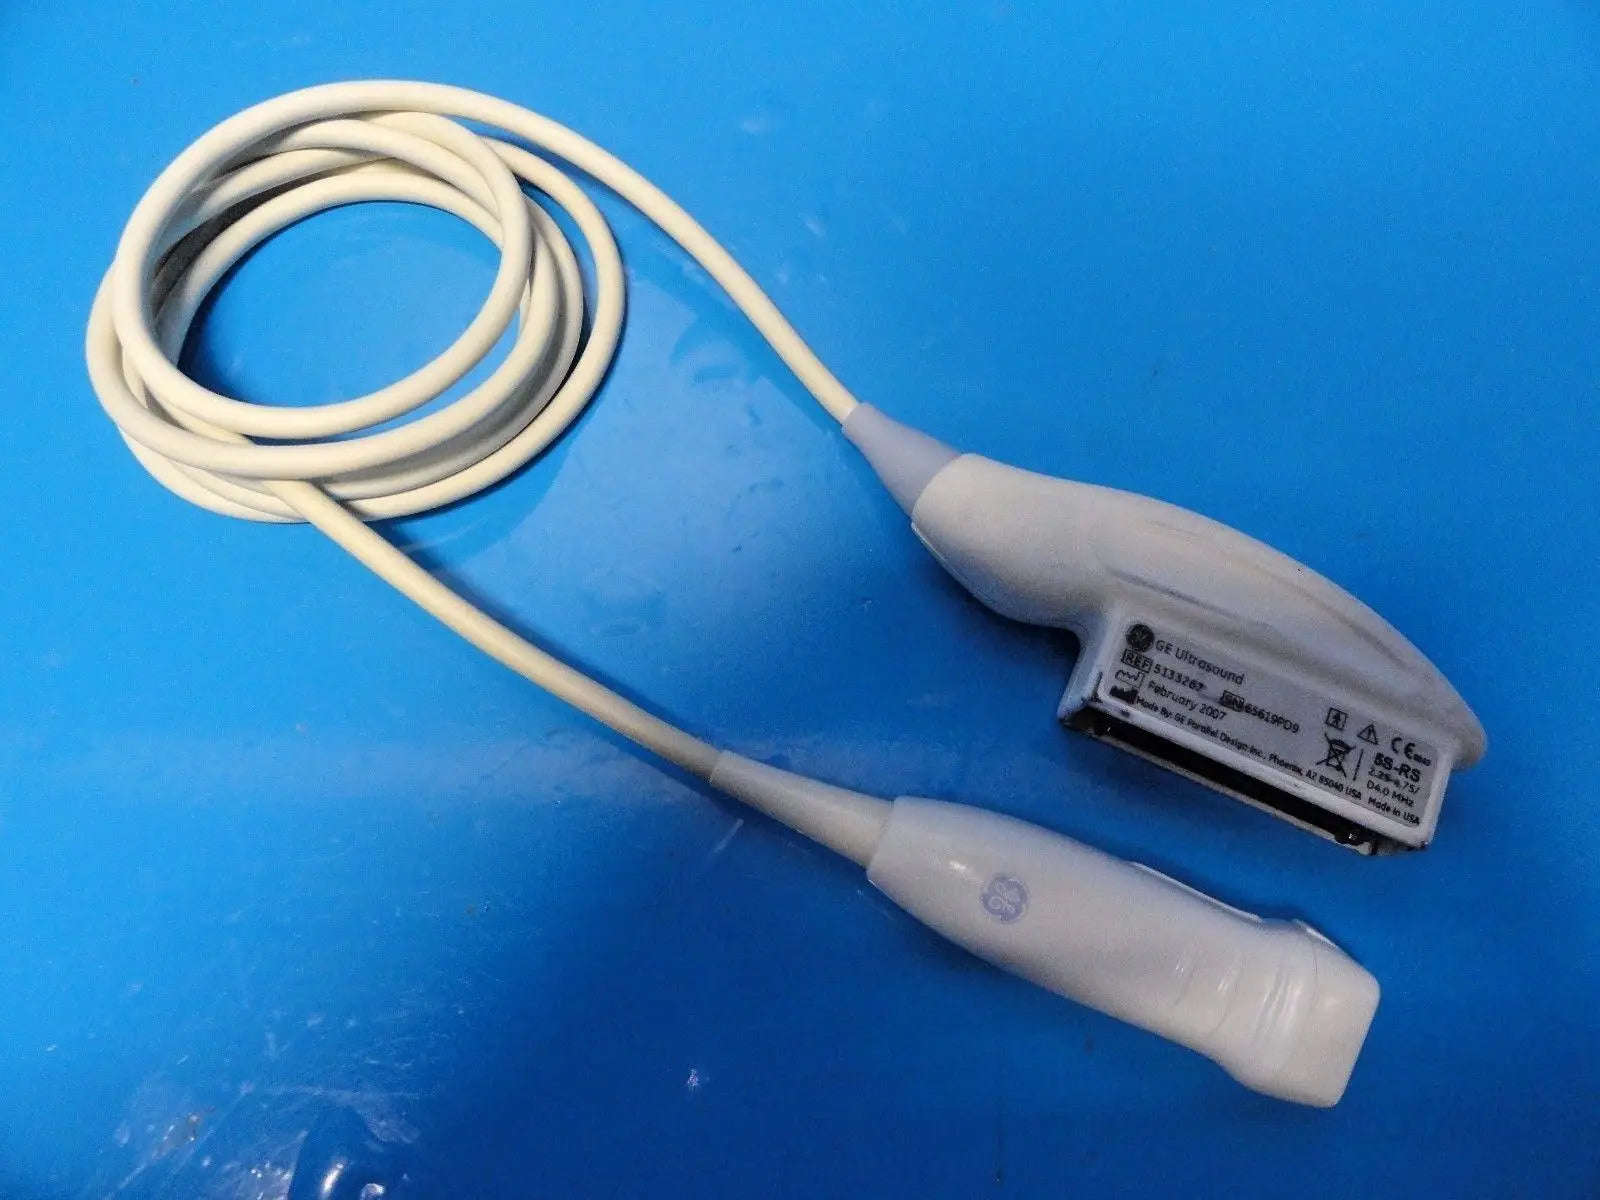 GE 5S-RS P/N 5133267 Sector Probe For most GE Vivid Ultrasound Systems~13749 DIAGNOSTIC ULTRASOUND MACHINES FOR SALE